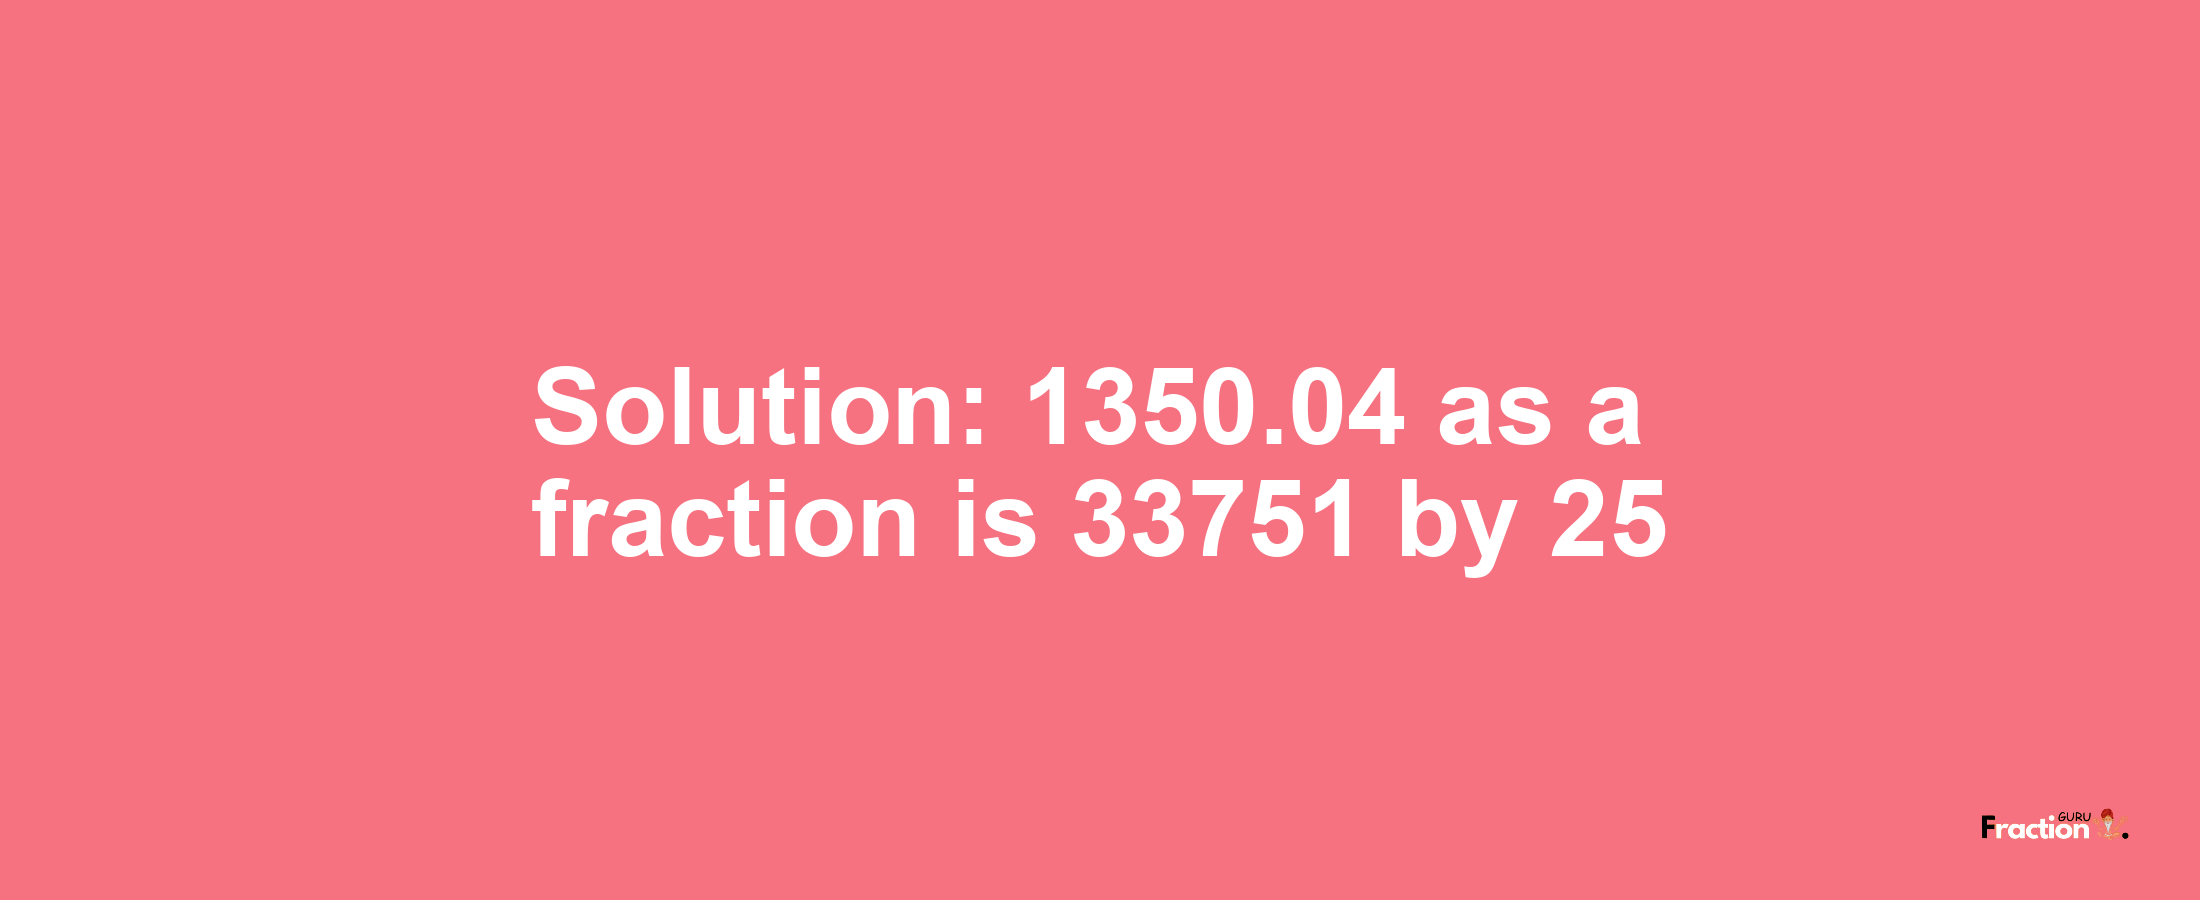 Solution:1350.04 as a fraction is 33751/25